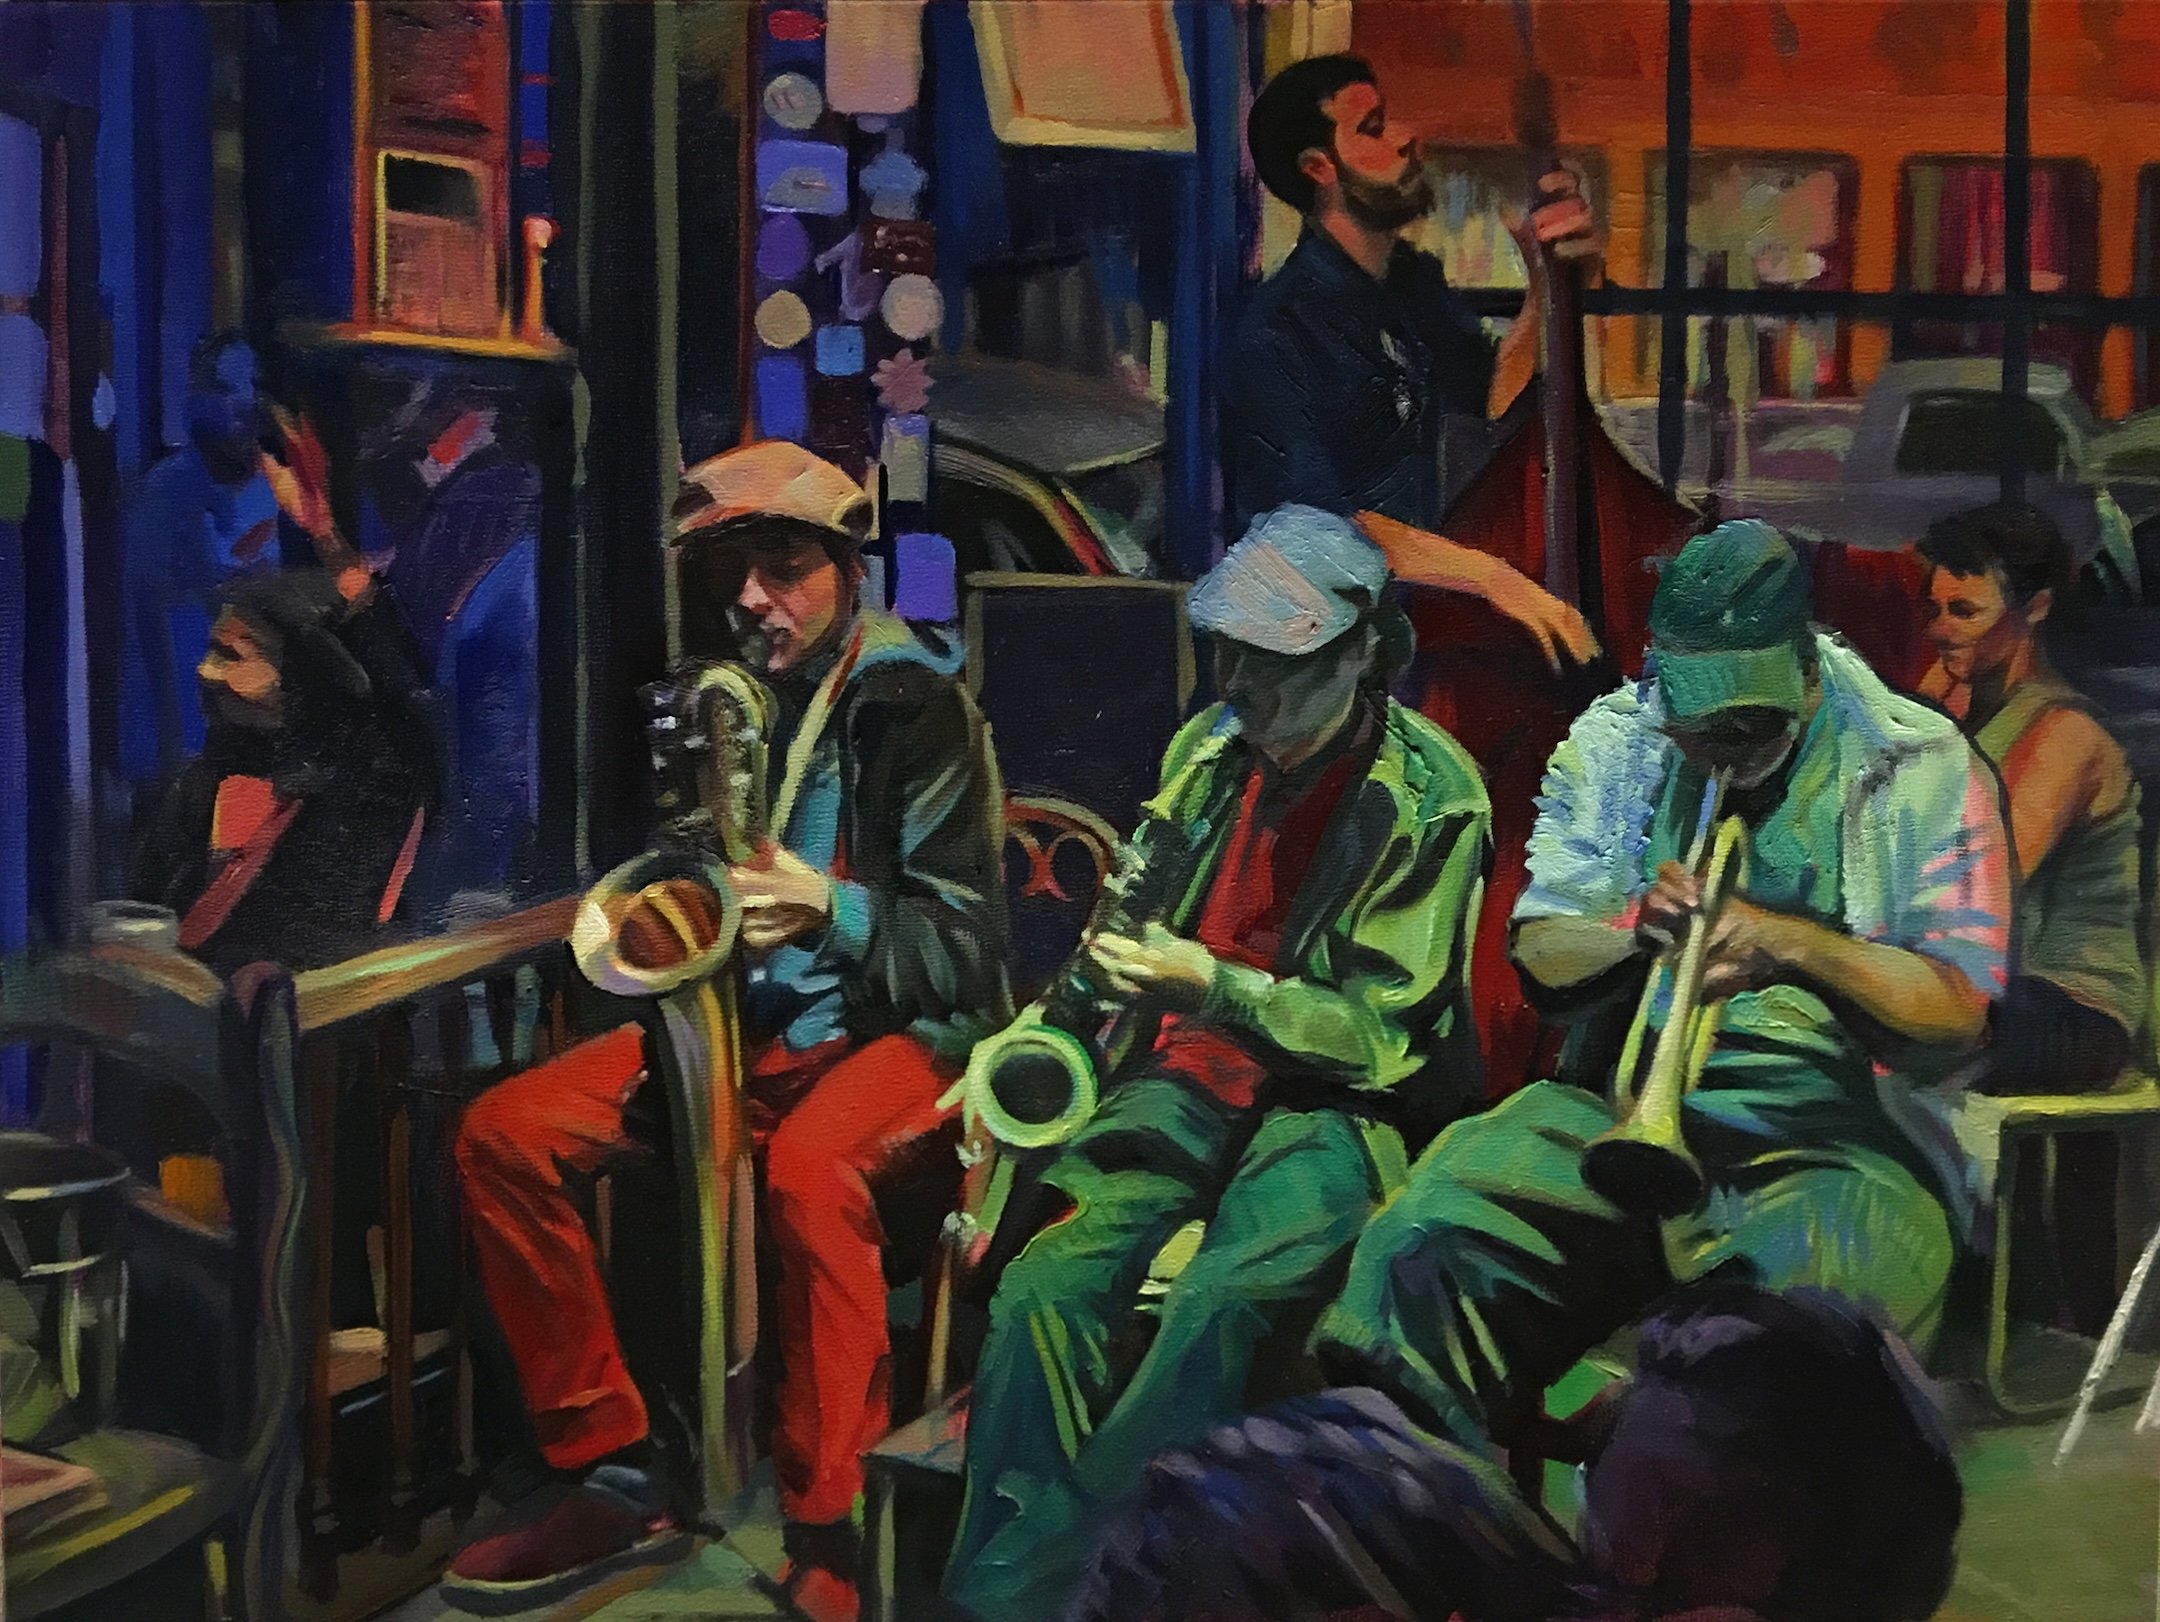    Flaming the Jazz Tradition  , 12” x 16”, oil on wood pane 